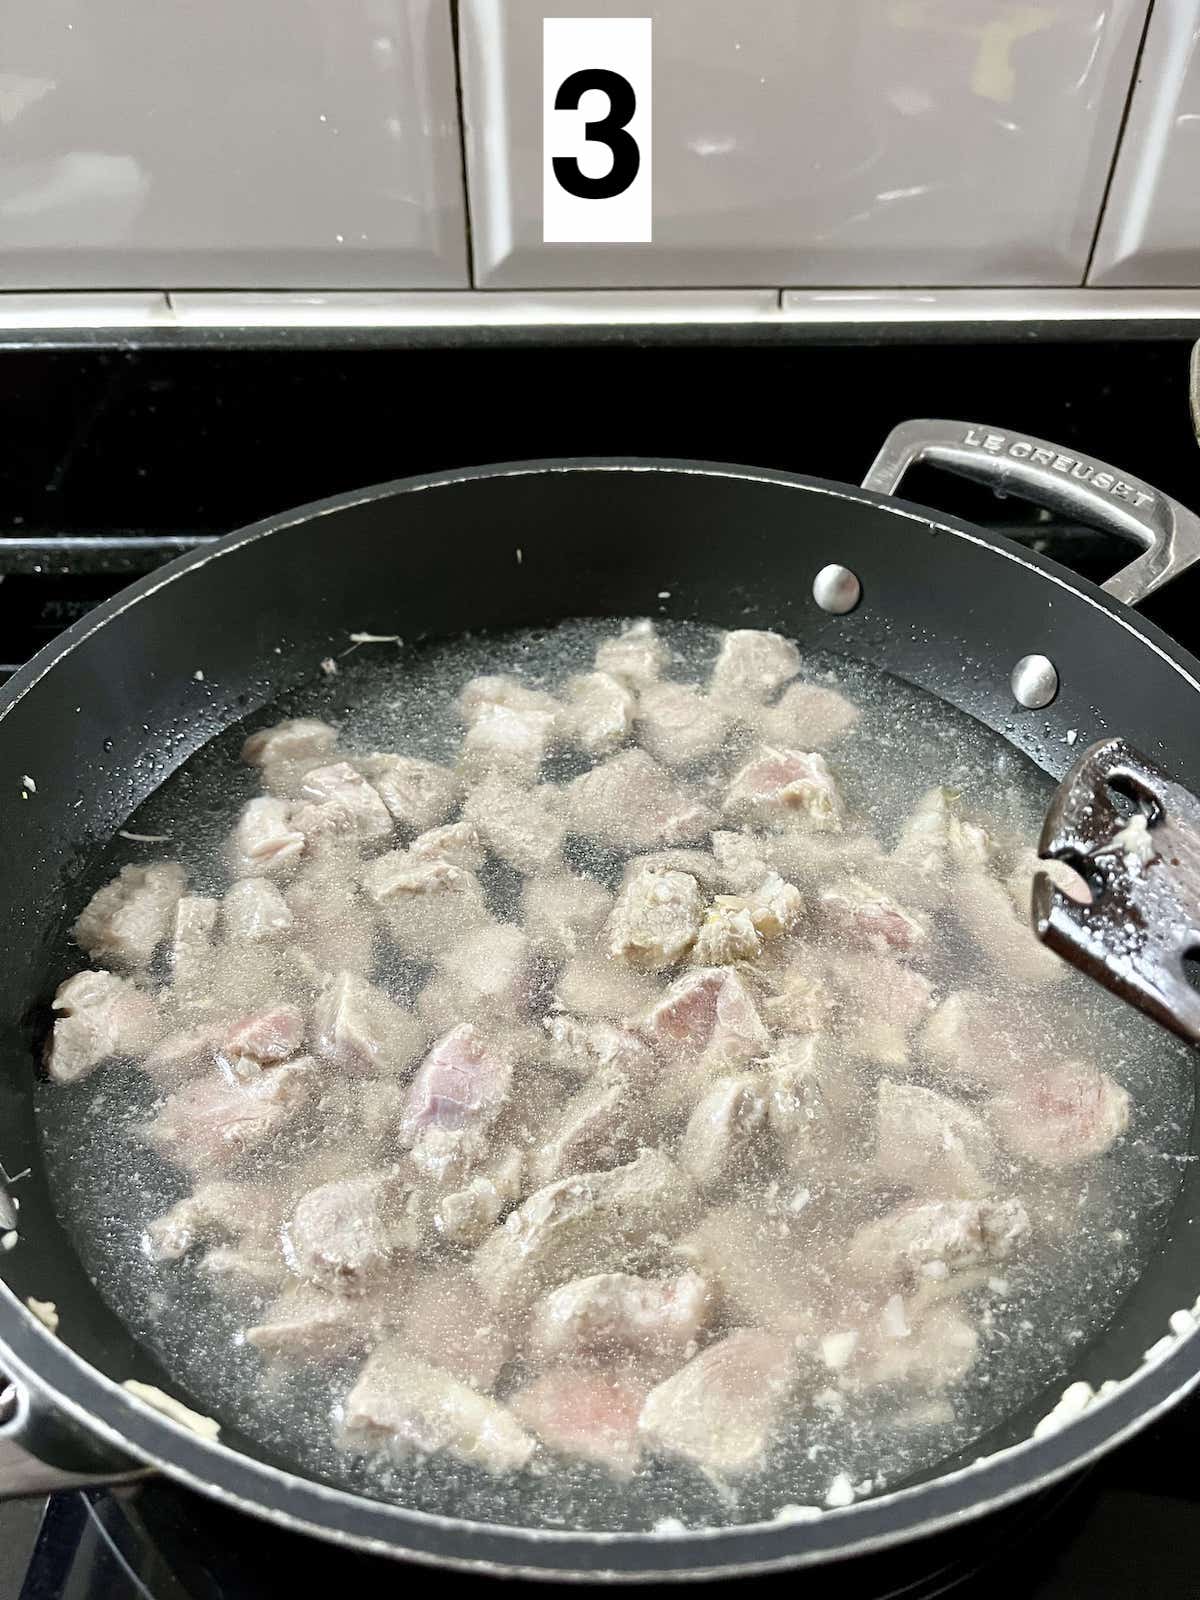 Cooking pork in water in a pan.